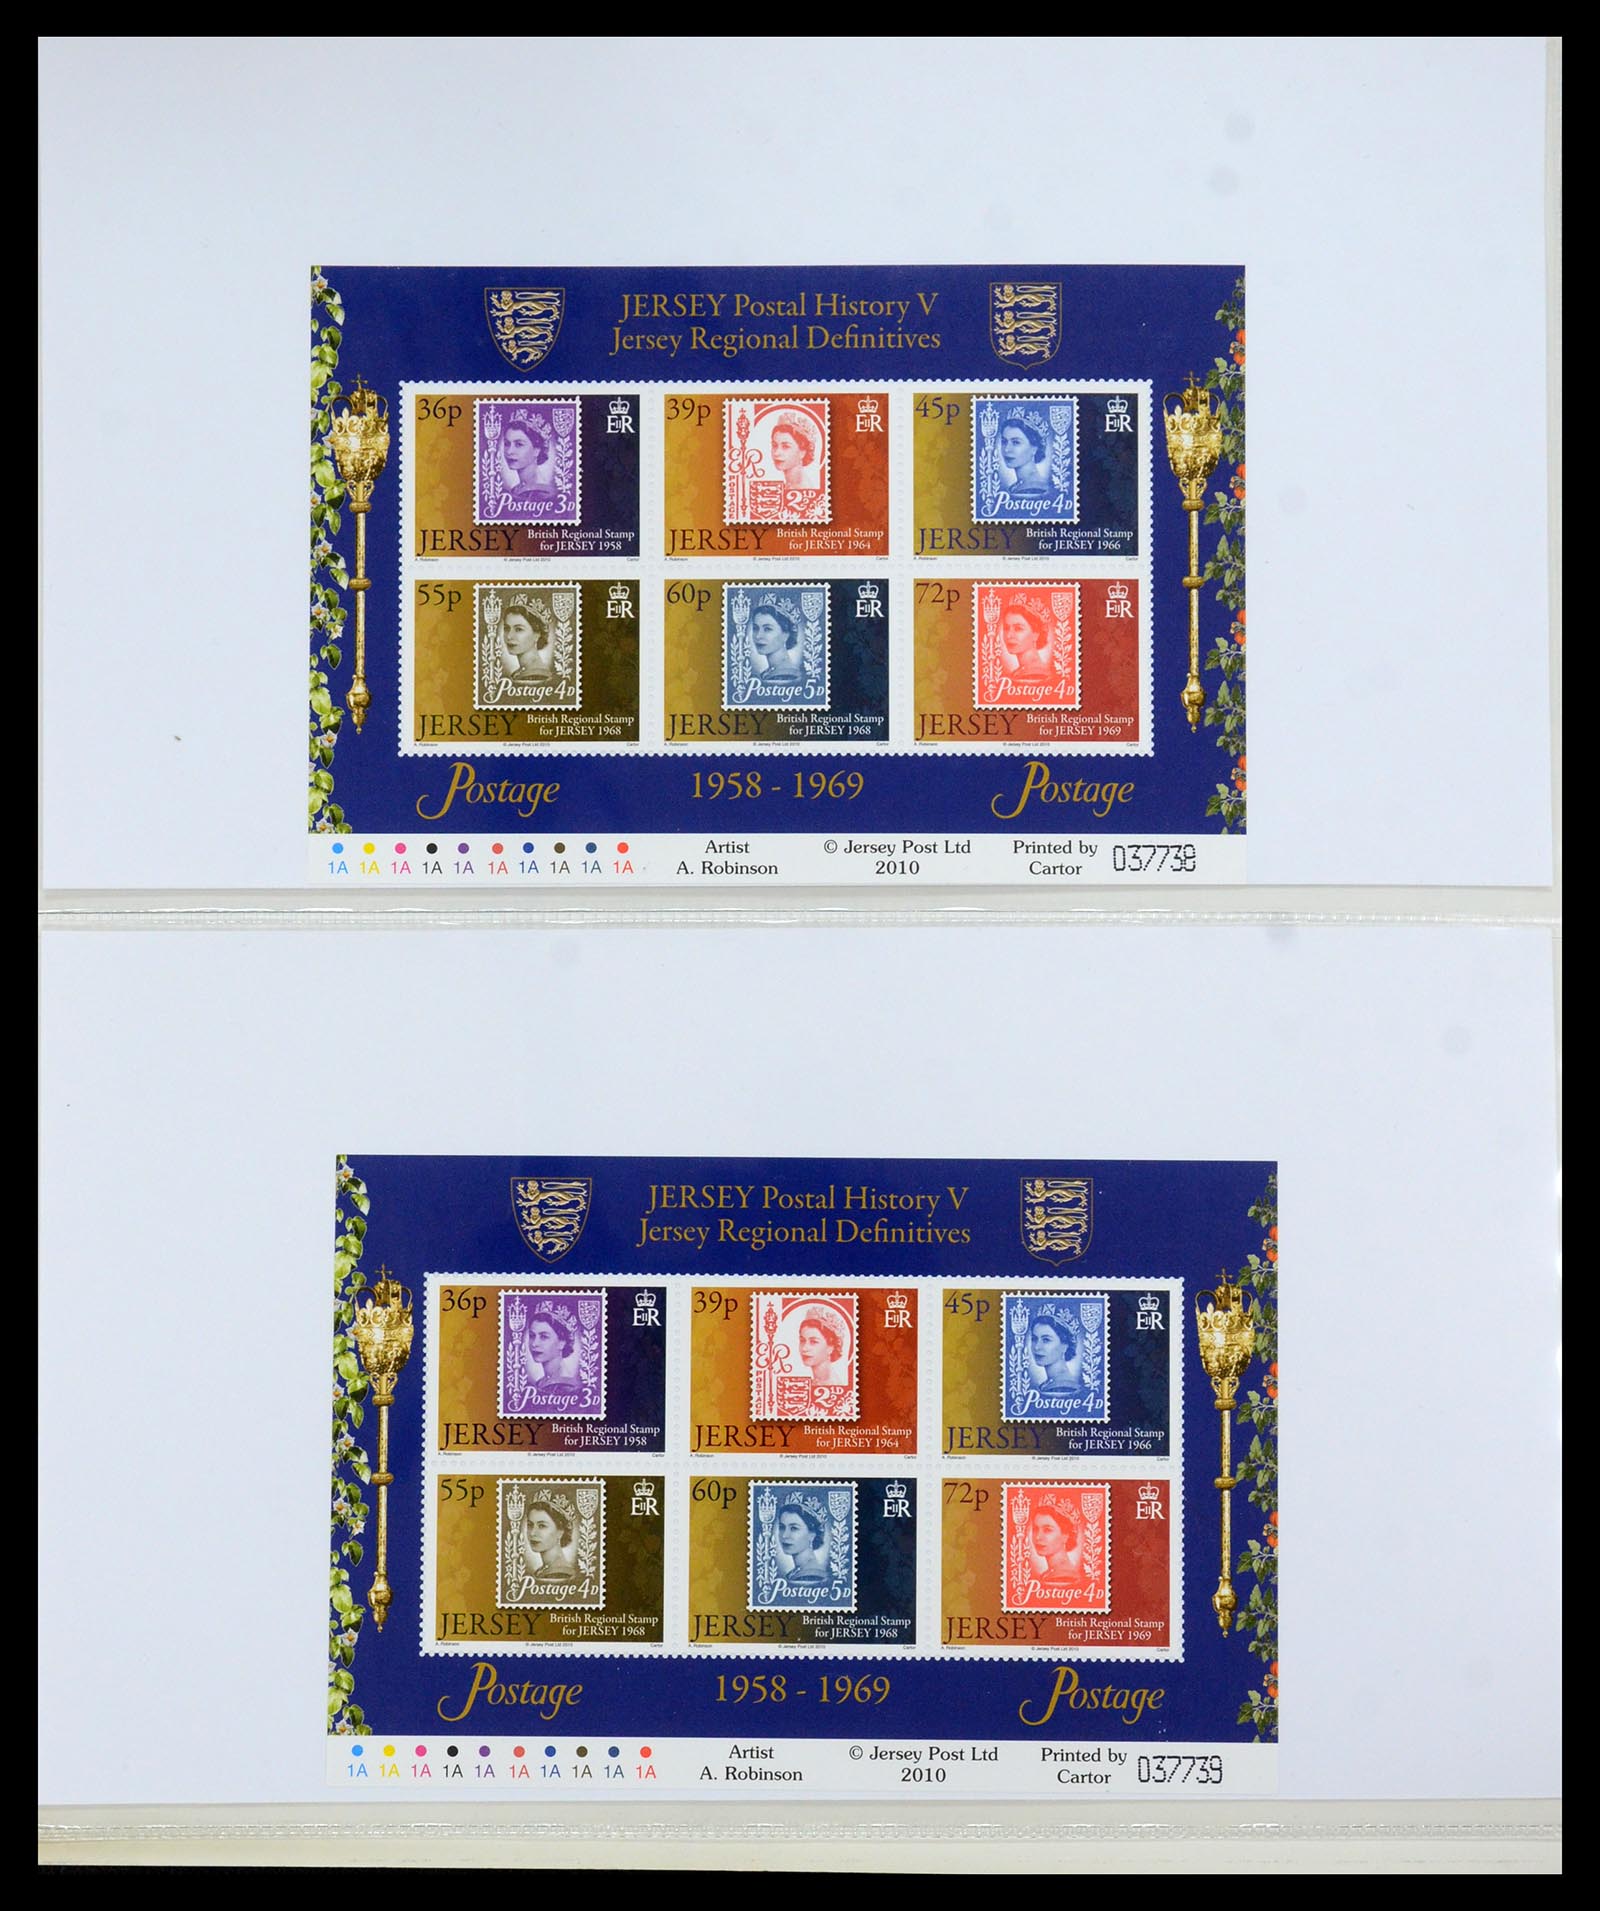 35743 087 - Stamp Collection 35743 Jersey 2004-2010.